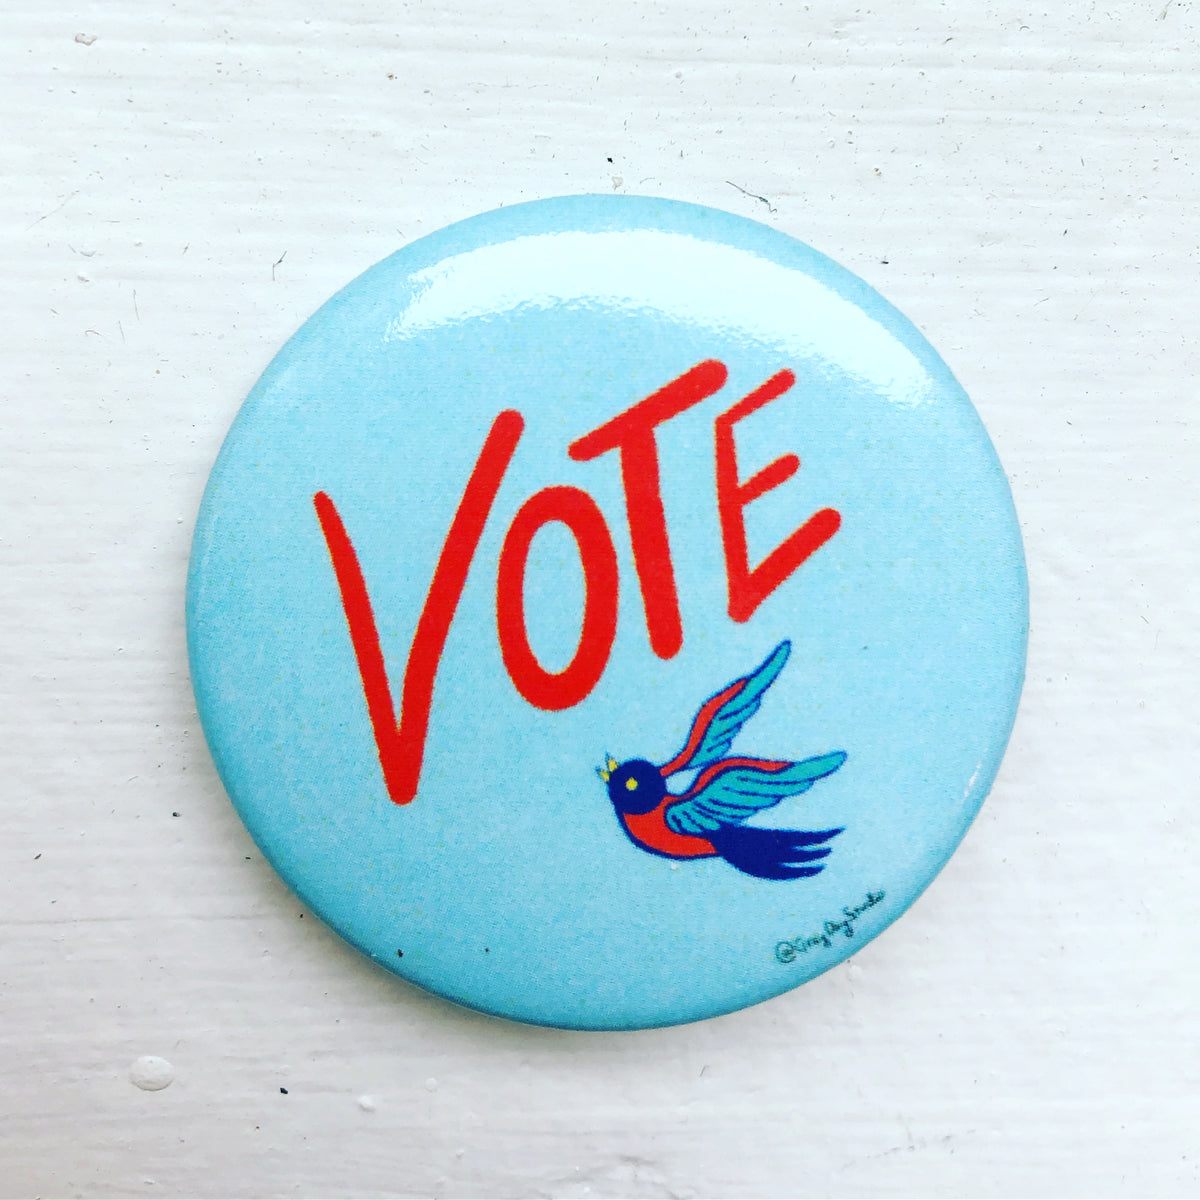 Vote, a little bird told me to get out the vote political activist Swag, pin- Pins